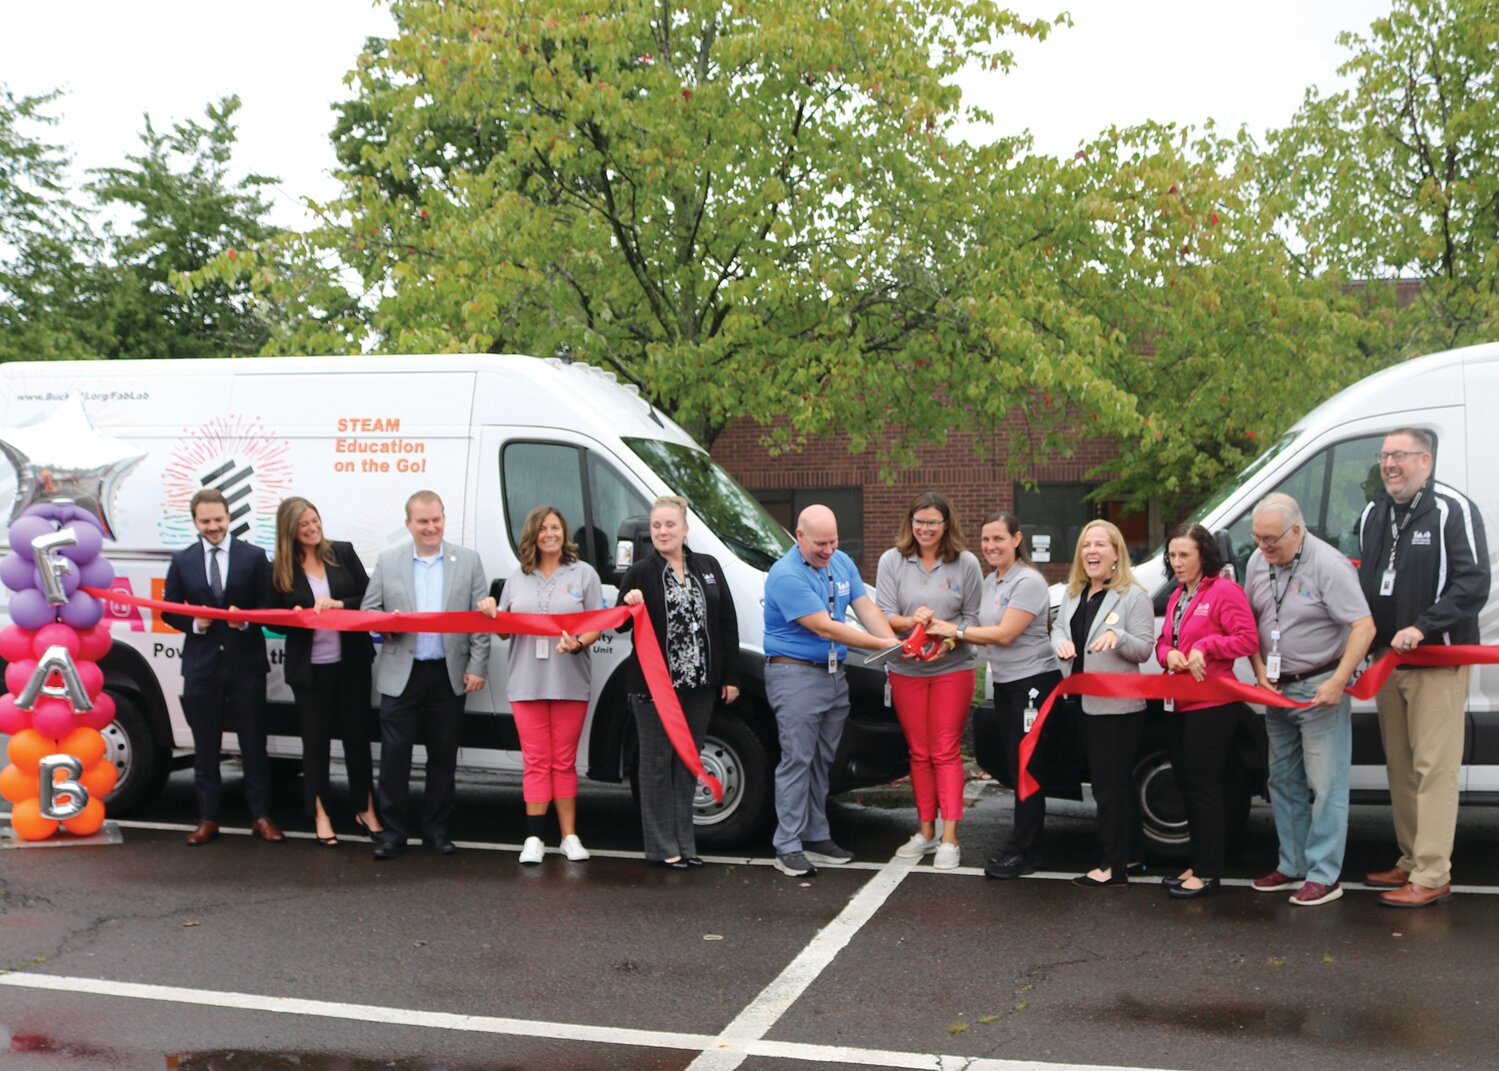 A ribbon cutting for the Bucks County Intermediate Unit’s second Mobile Fab Lab was held on Sept. 18.  From left are: Ethan Seletsky, U.S. Sen. Bob Casey’s office; state Rep. Kristin Marcell, state Rep. Brian Munroe, Bucks IU’s Nicole Borland, Dr. Mary Agnes DeCicco, Matt Hayden, Dr. Lindsey Sides and Megan Boletta; Shannon Sticker, state Sen. Steve Santarsiero’s office; and Bucks IU’s Dr. Rachel Holler, board President John D’Angelo and Dr. Mark Hoffman, Bucks IU executive director.